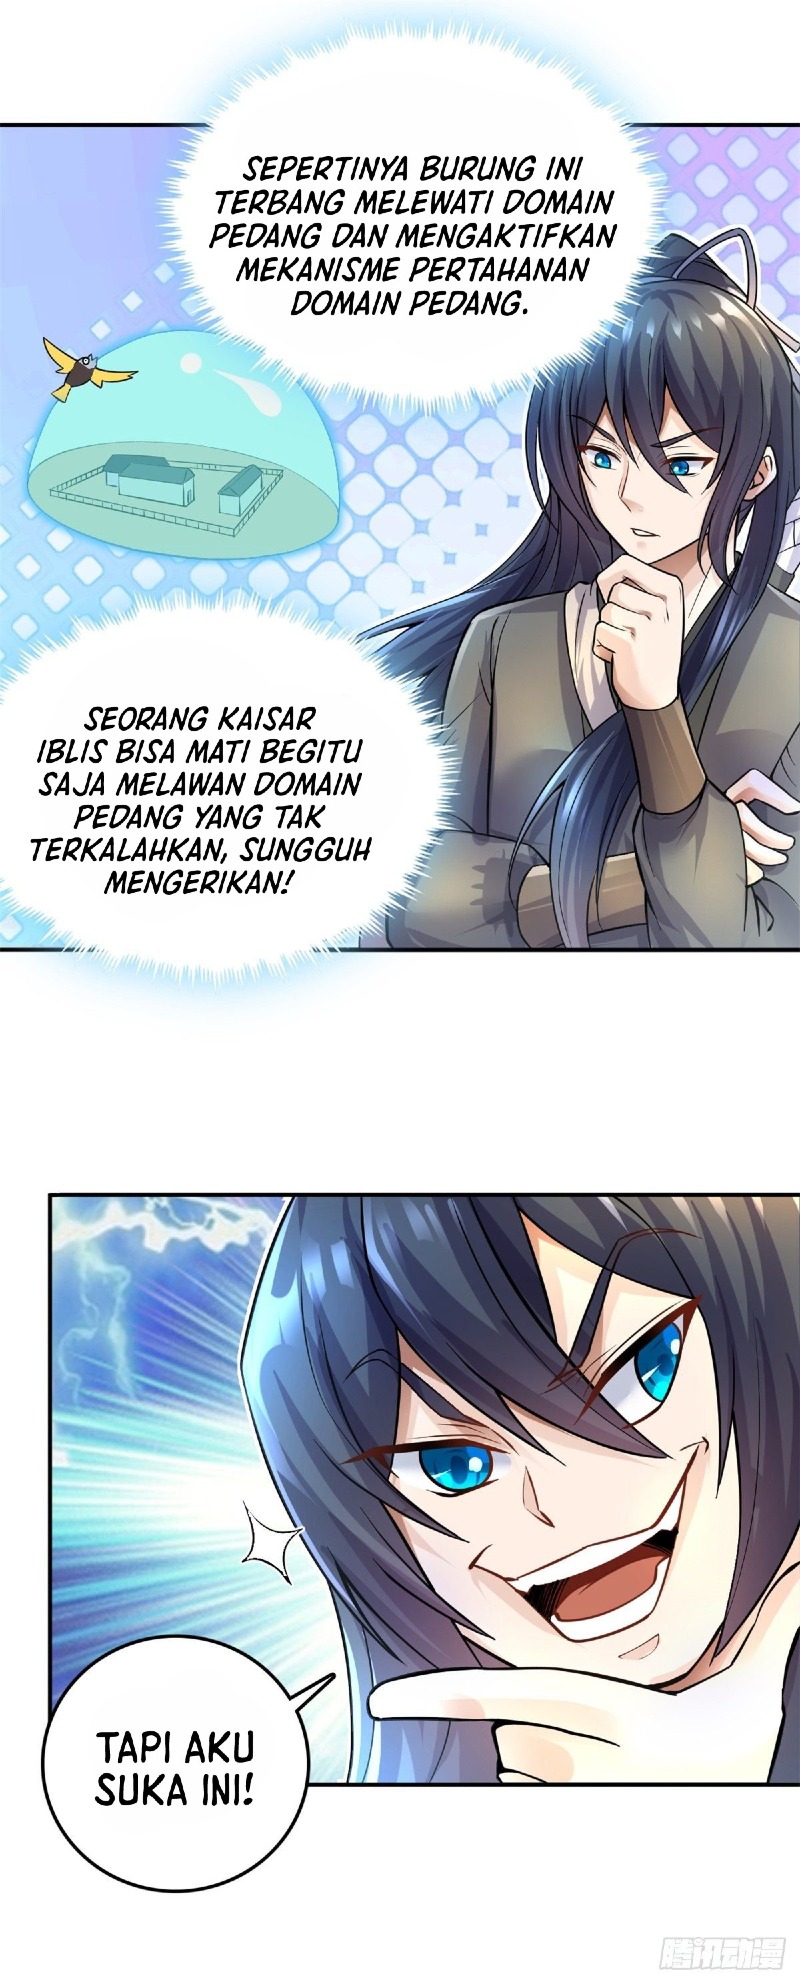 With a Sword Domain, I Can Become the Sword Saint Chapter 06